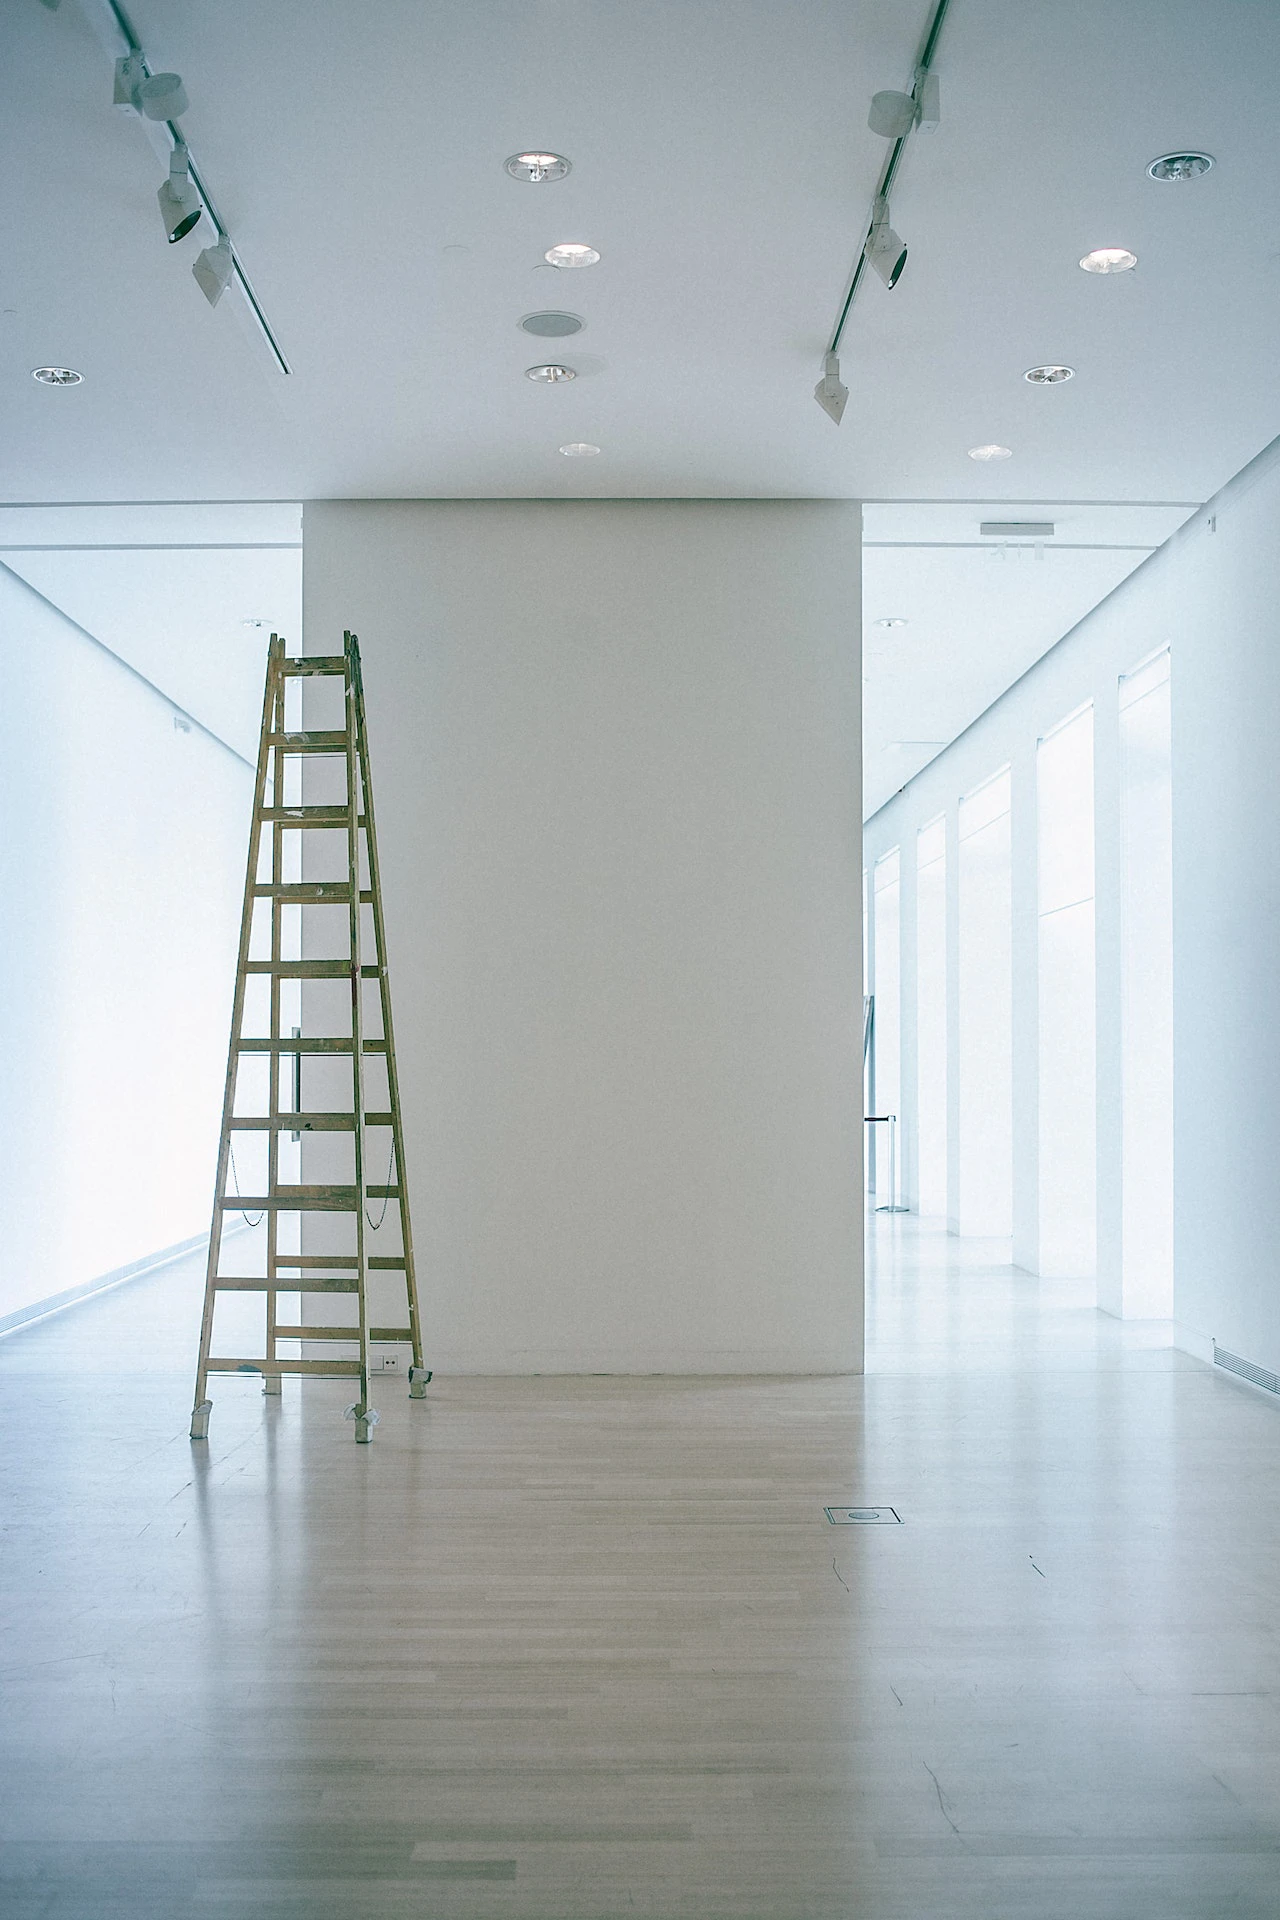 Image of a ladder in a room with all-white walls